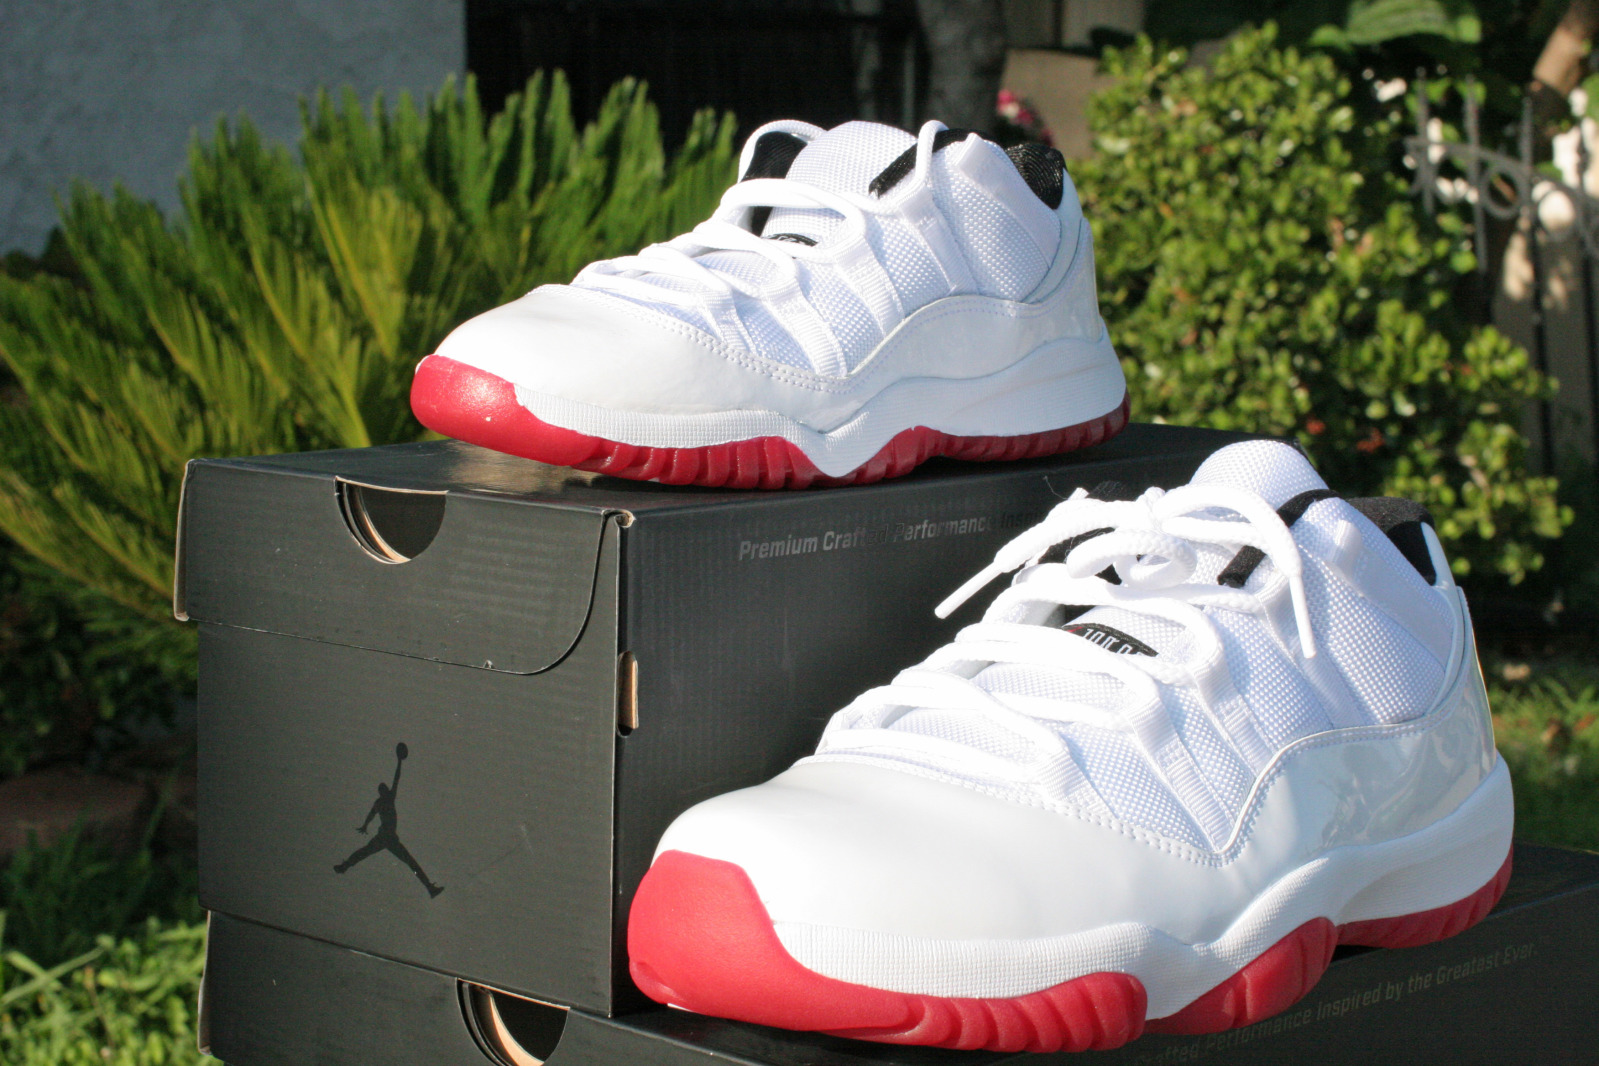 jordan 11 all white and red